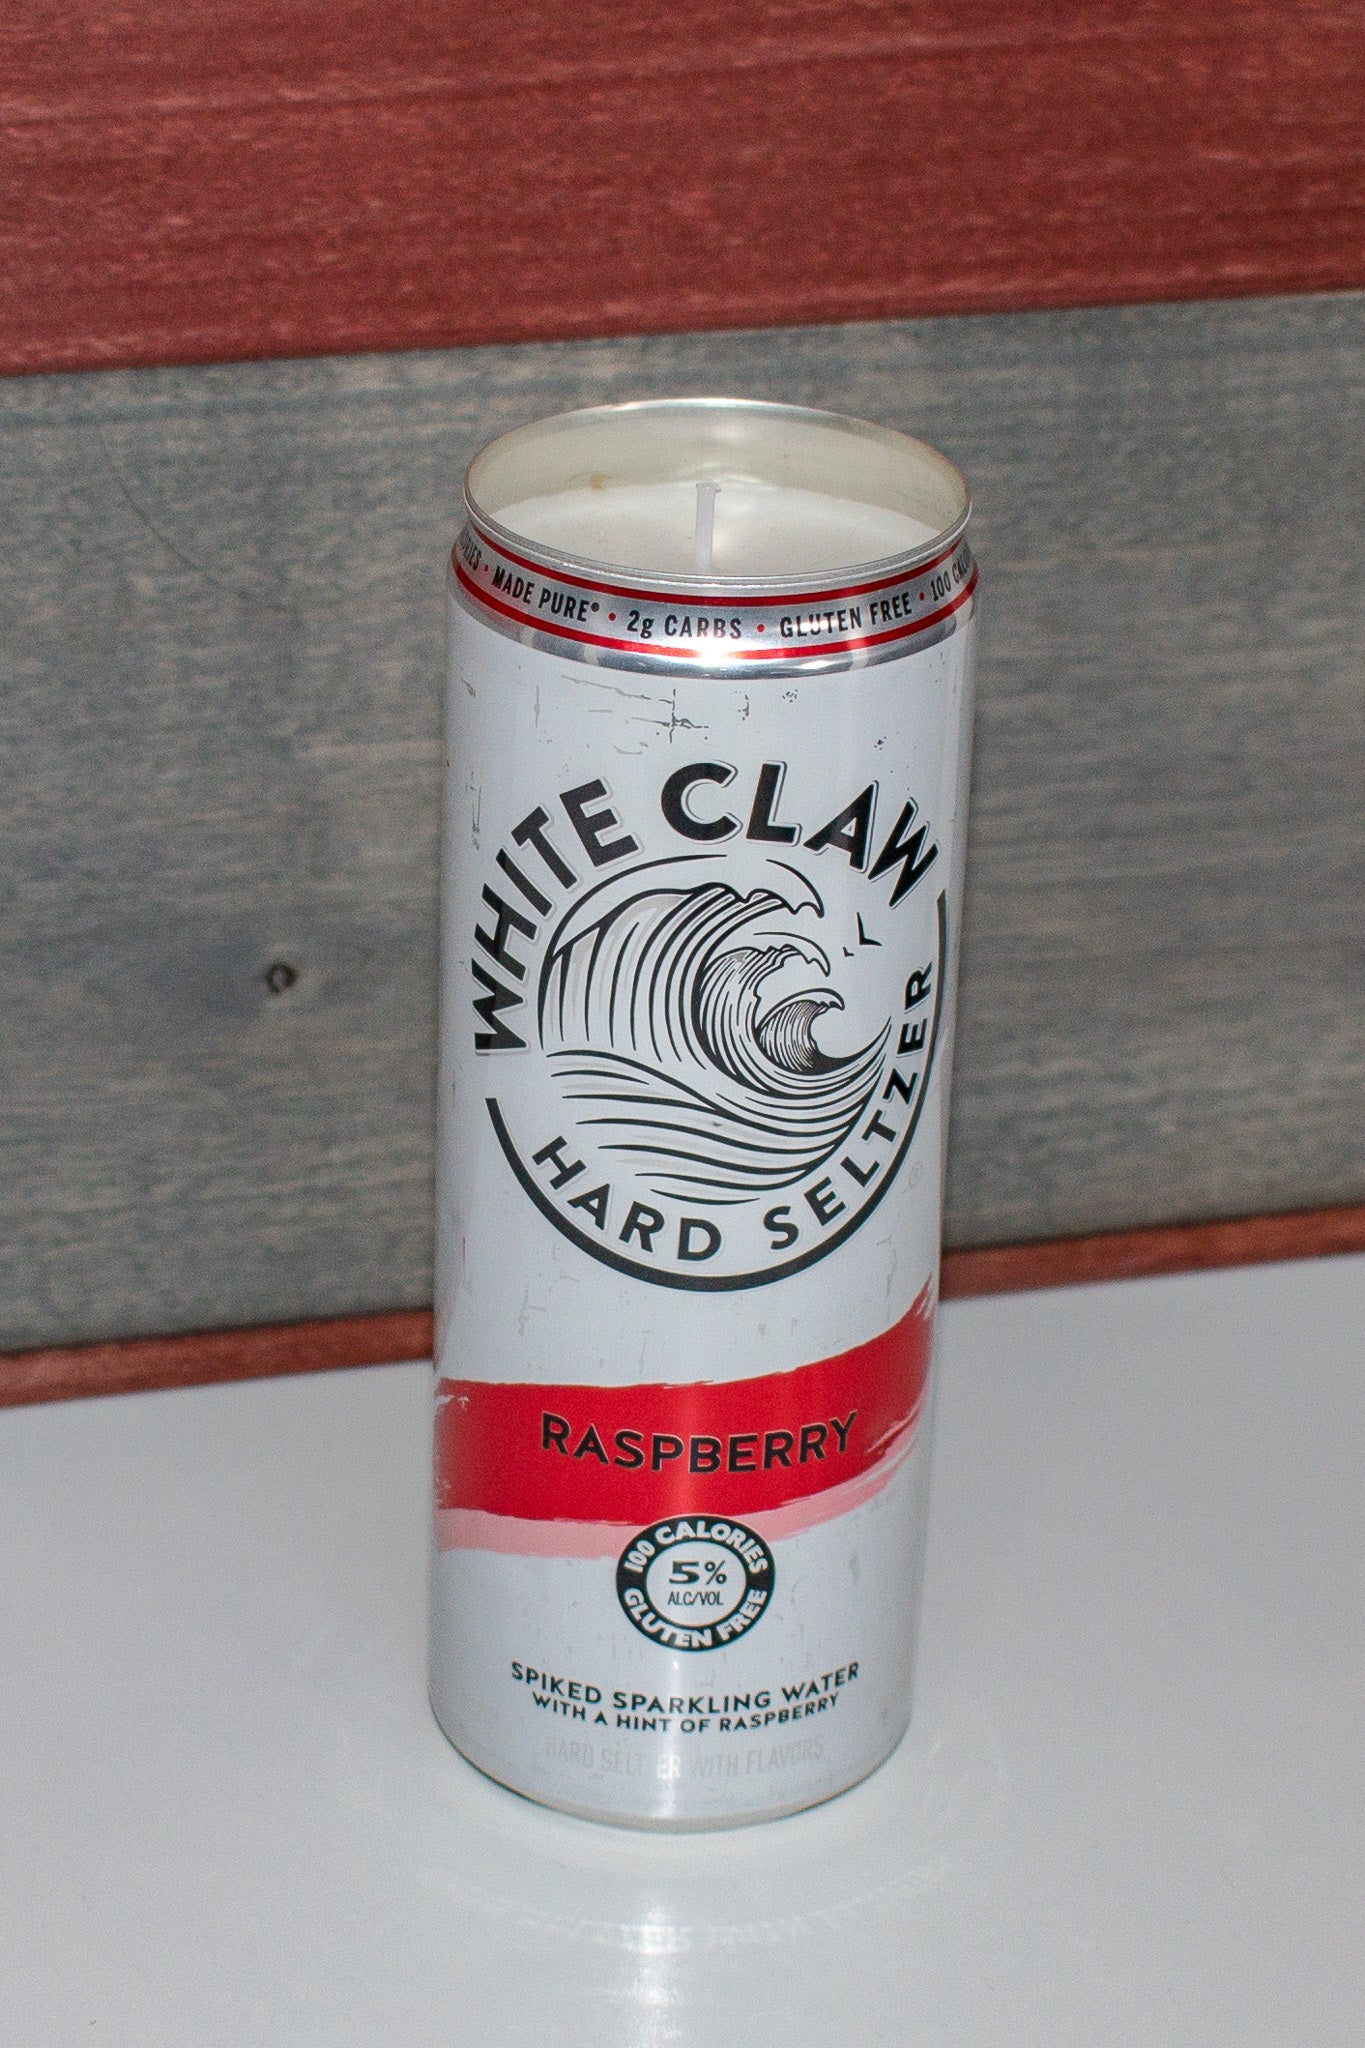 Raspberry Repurposed White Claw Candle